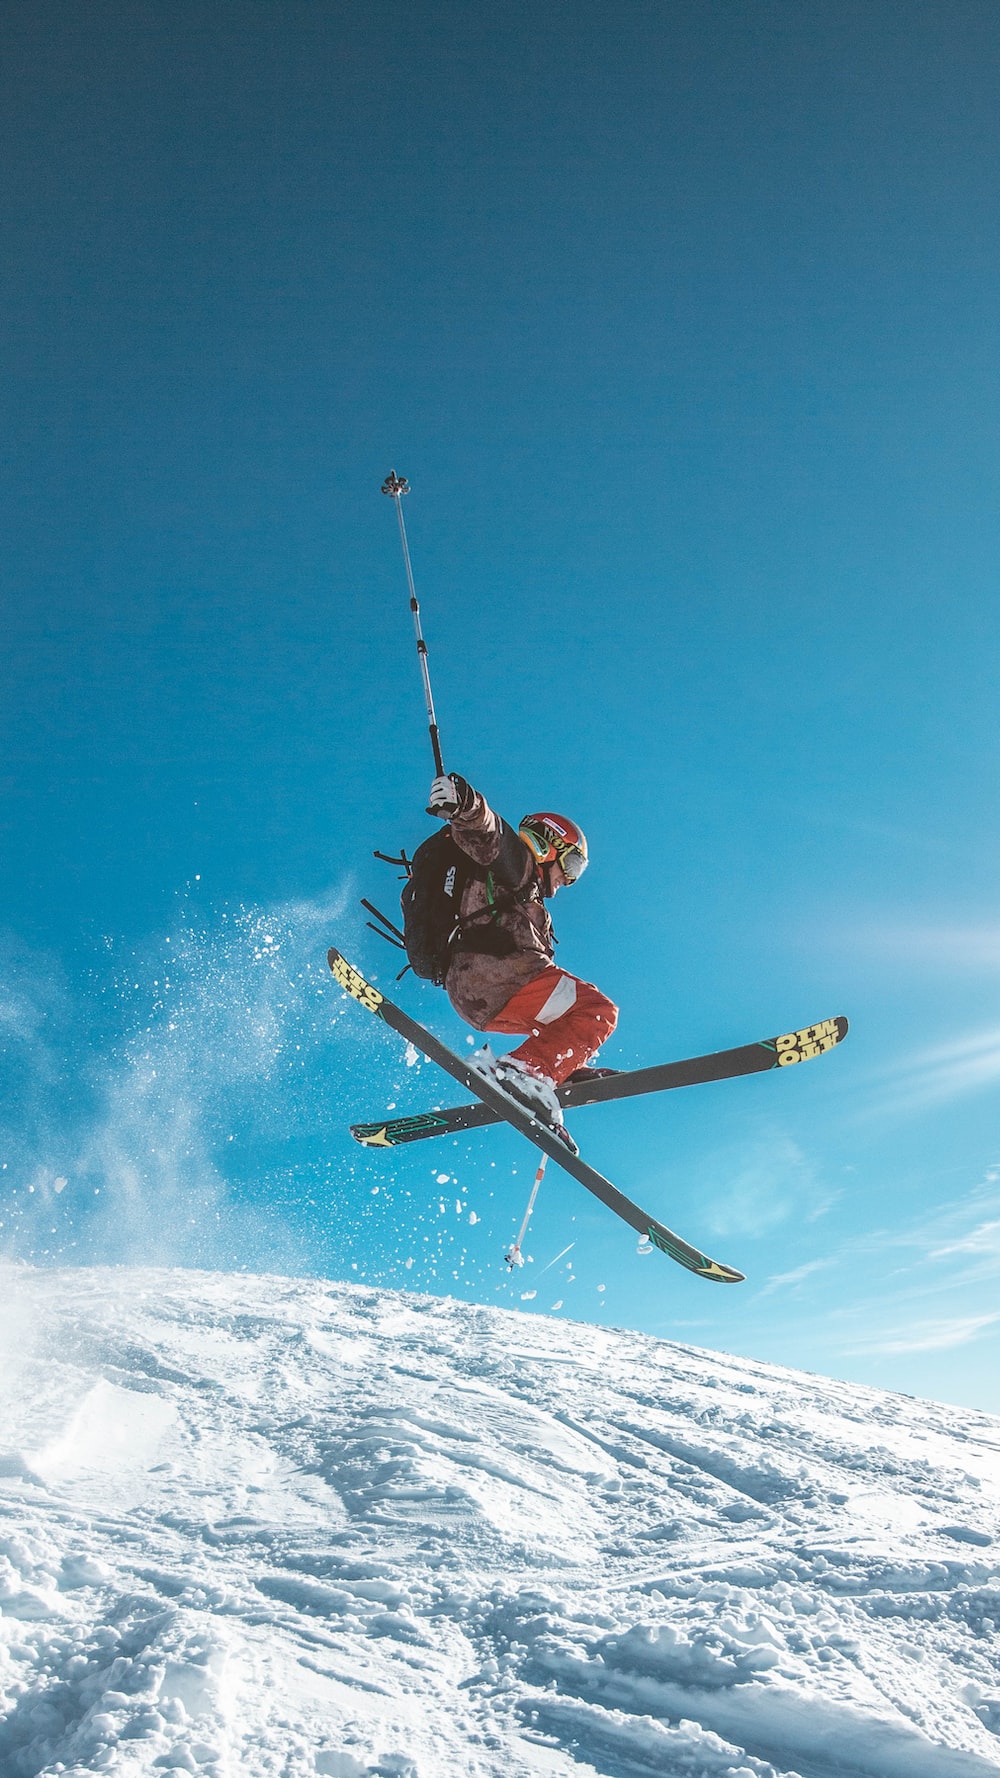 Ski pictures download free images stock photos on